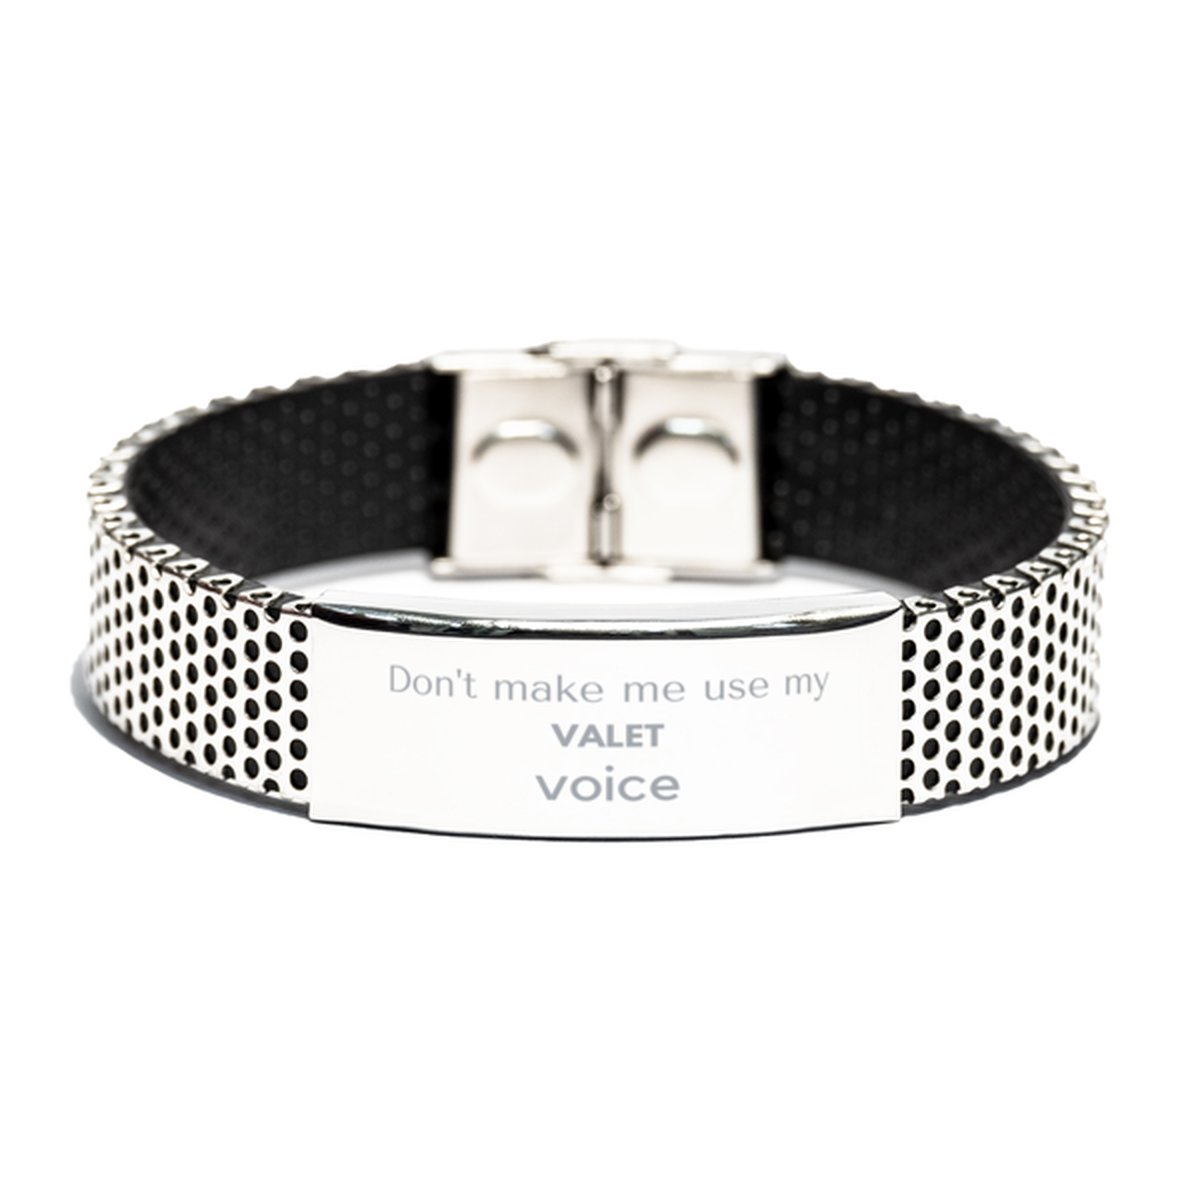 Don't make me use my Valet voice, Sarcasm Valet Gifts, Christmas Valet Stainless Steel Bracelet Birthday Unique Gifts For Valet Coworkers, Men, Women, Colleague, Friends